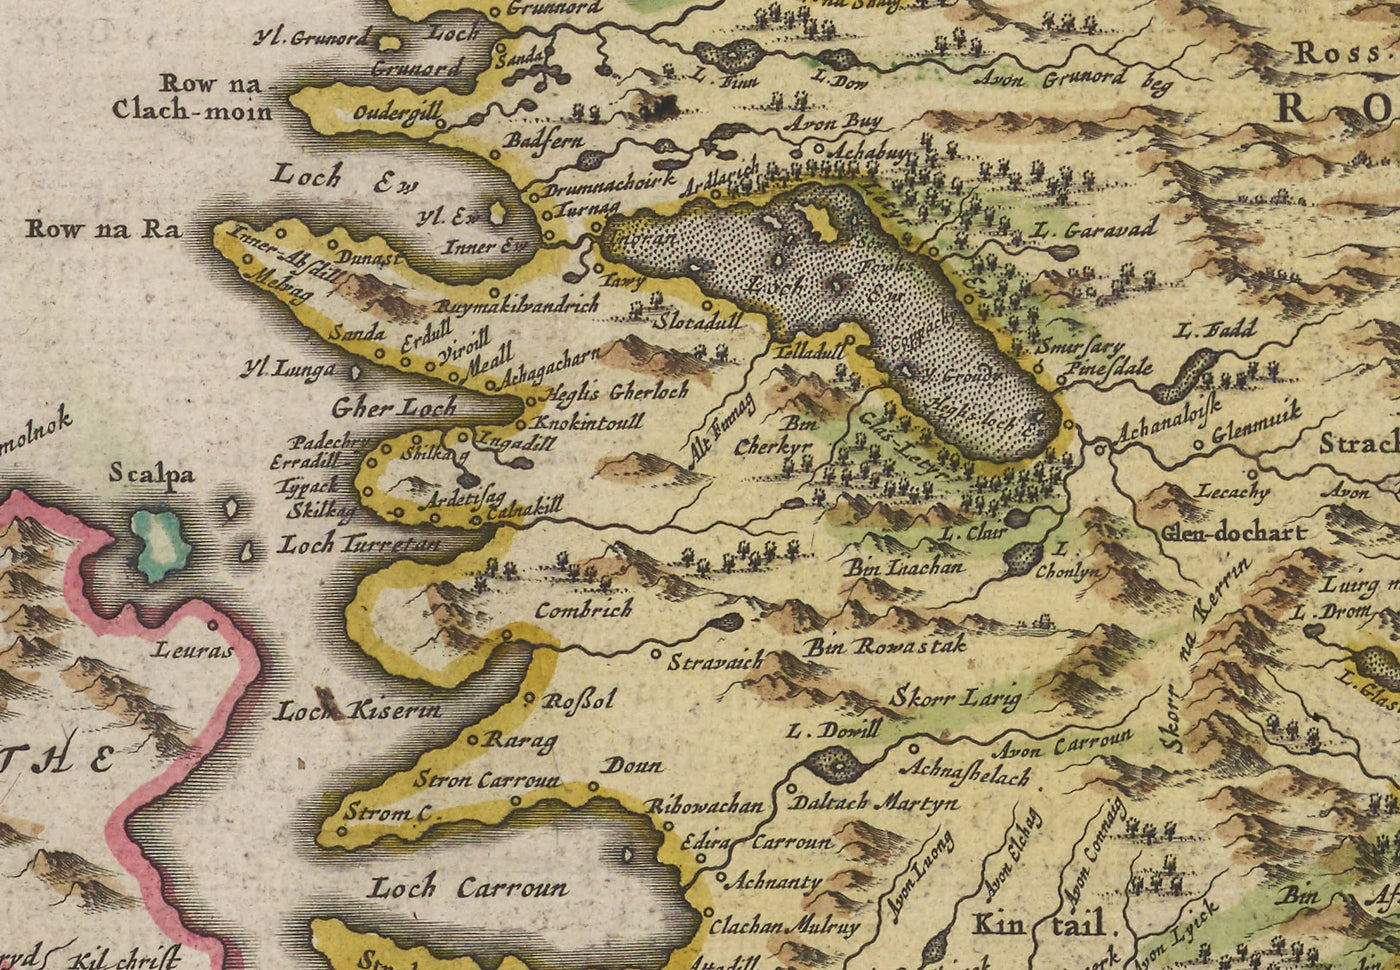 Old Map of the Scottish Highlands, 1665 by Blaeu - Caithness, Sutherland, Ross, Nairn, Inverness, Moray